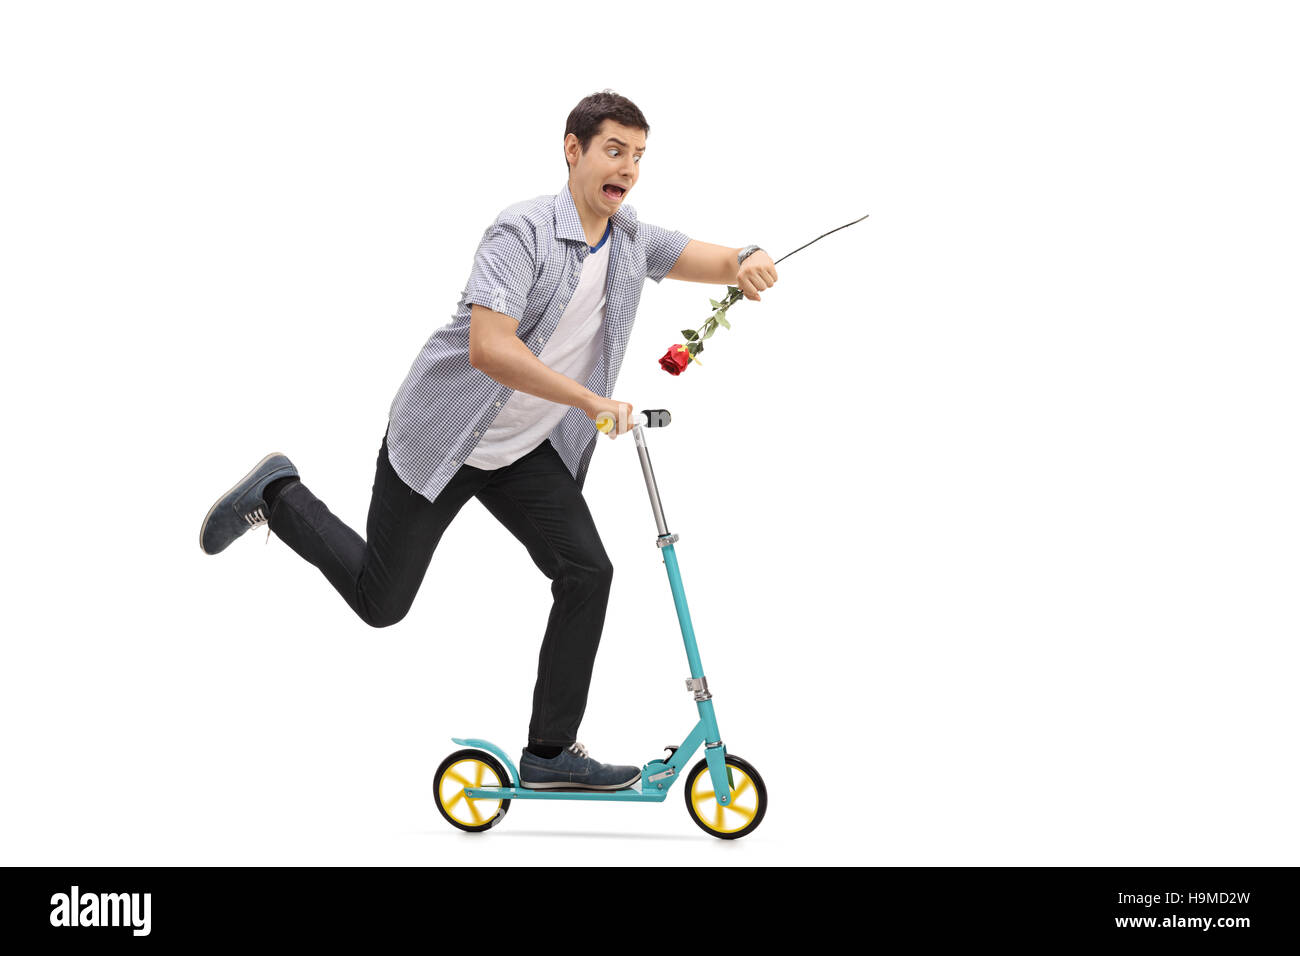 Full length portrait of a young man riding a scooter and being late isolated on white background Stock Photo